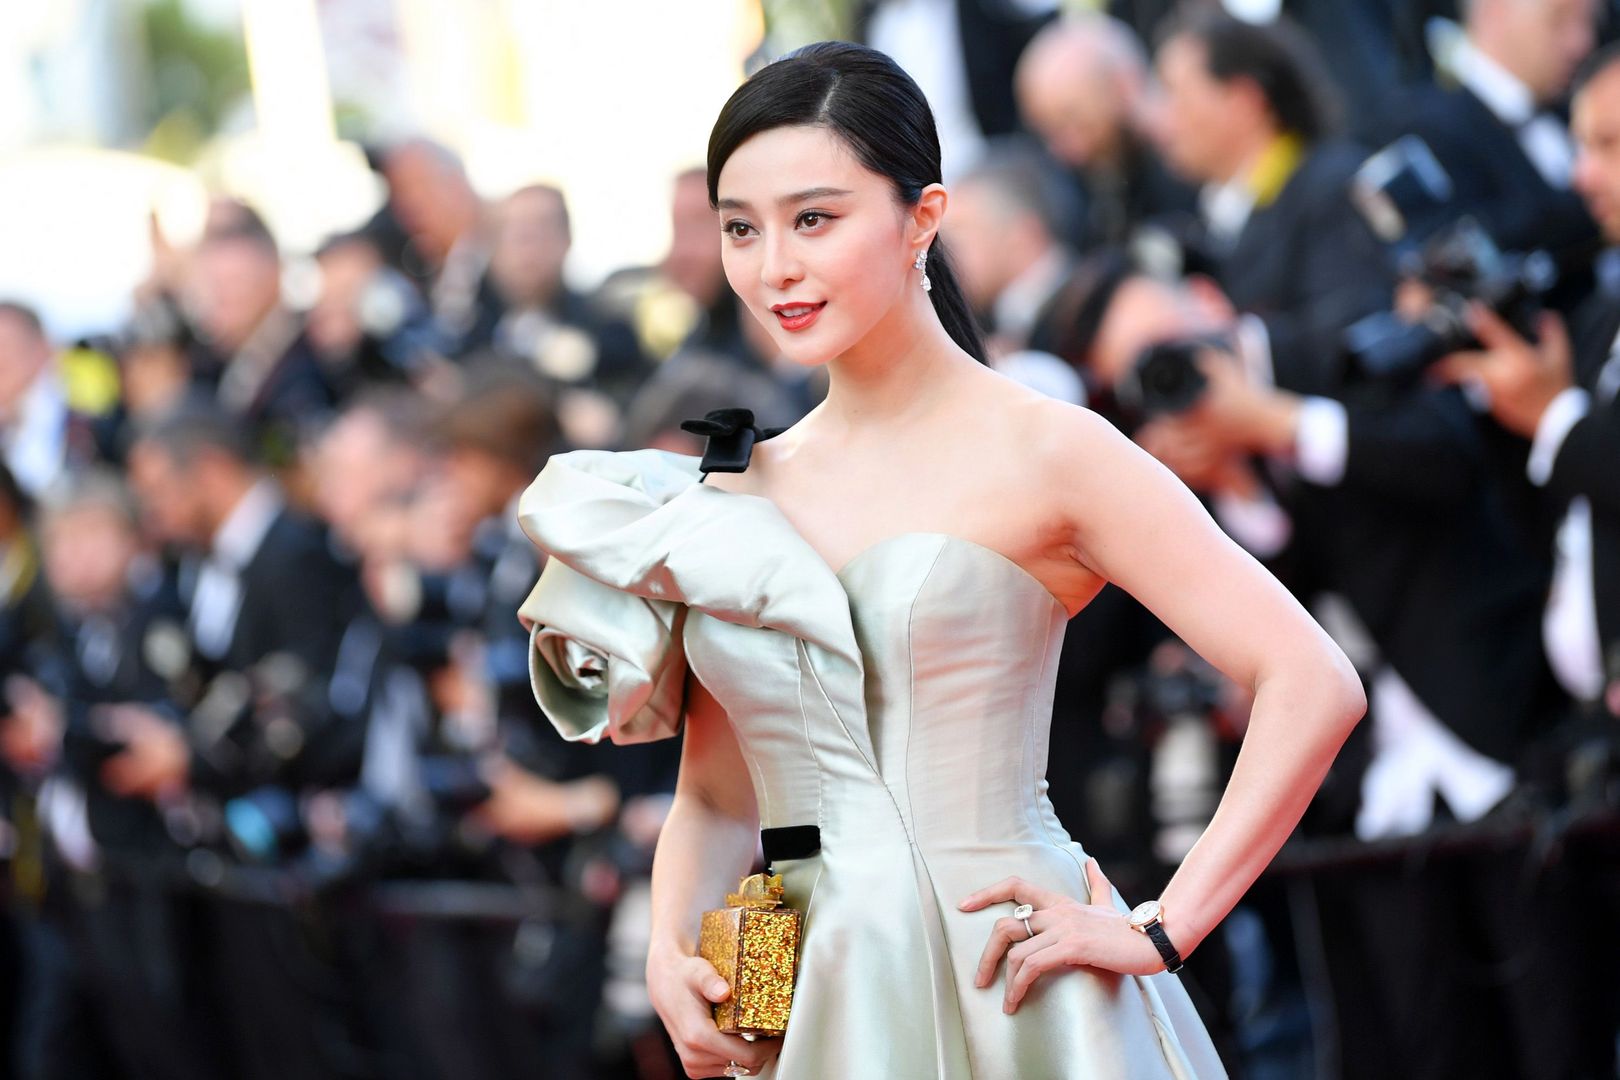 attends the screening of "Ash Is The Purest White (Jiang Hu Er Nv)" during the 71st annual Cannes Film Festival at Palais des Festivals on May 11, 2018 in Cannes, France.